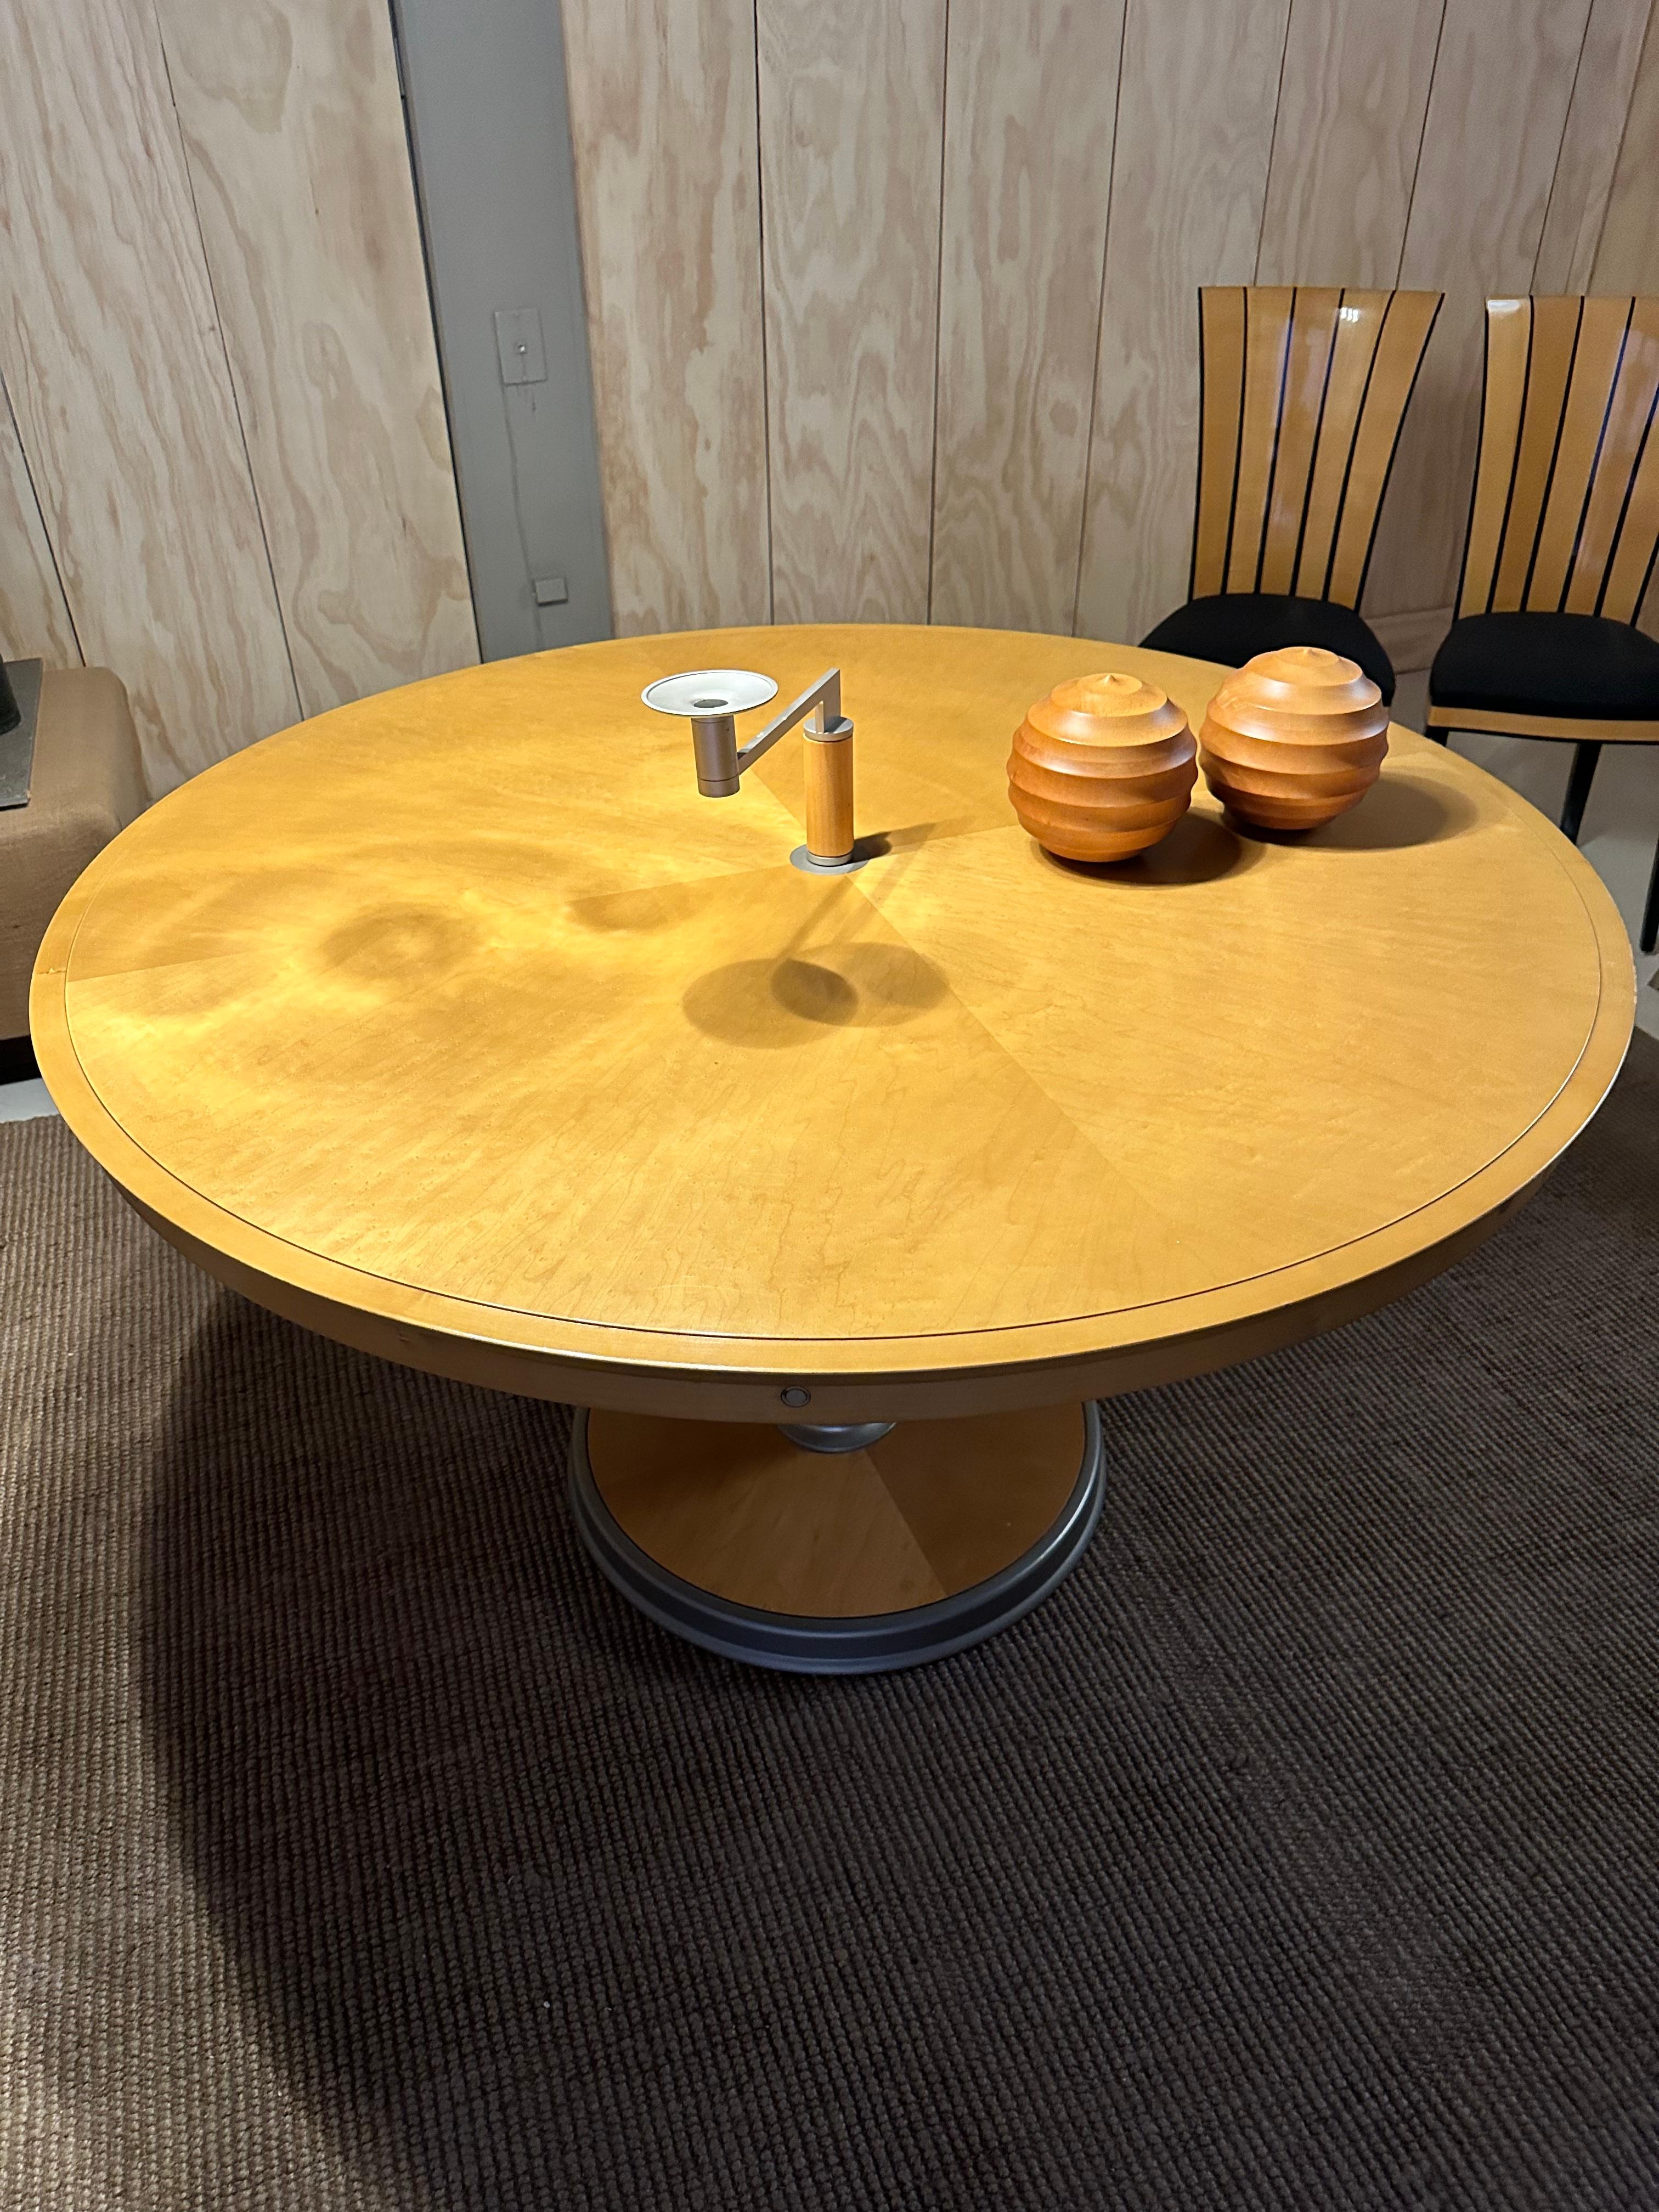 large round maple dining with 4 extensions /retractable supports. quite cleverly designed. heavy weighted base with brush aluminum accent toe kick skirt. wonderful veneer top pattern . exquisite quality manufacturing .
there is a center option for